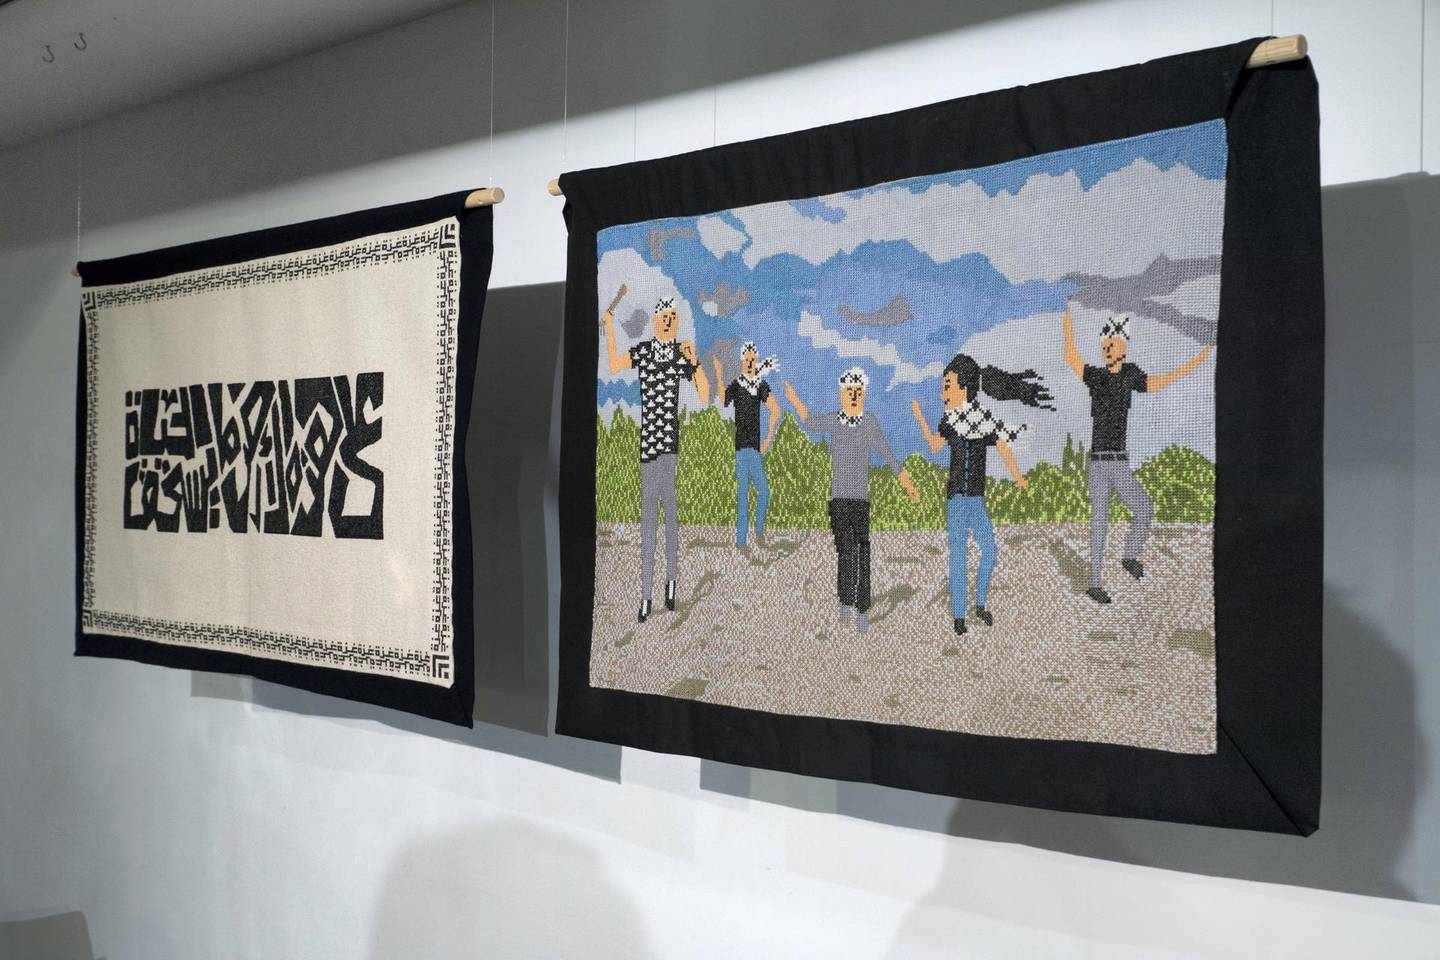 On this land and Great march of return, Palestine History Tapestry exhibition, which recently opened at the P21 Gallery in London. Photo by William Parry.